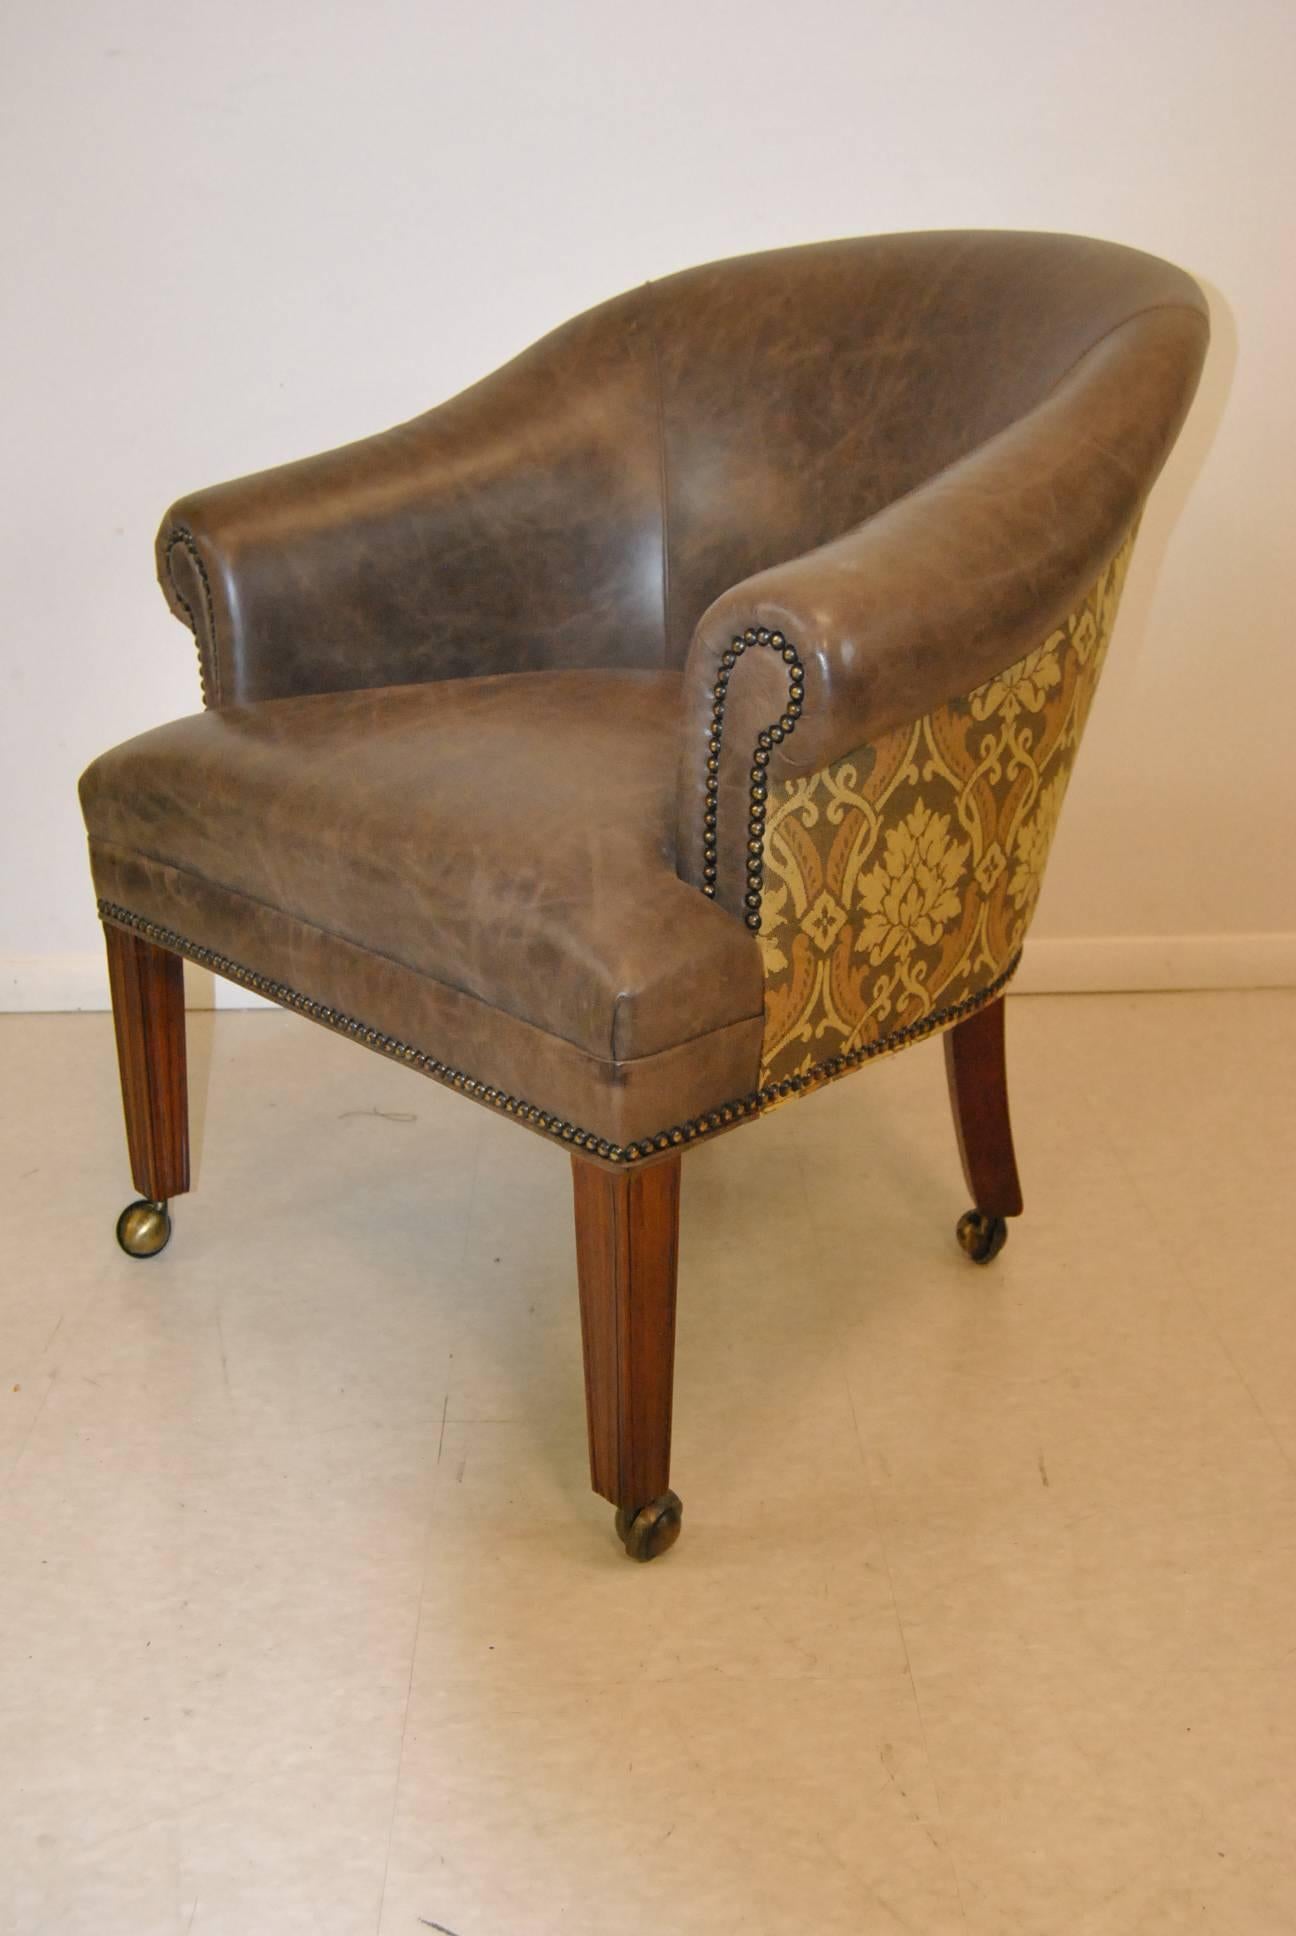 A beautiful set of four tub chairs by Hancock and Moore. These great chairs feature a factory distressed leather with a tapestry upholstery on the back and sides, nail head trim and castor legs. A very fine quality constructed set of chairs. The